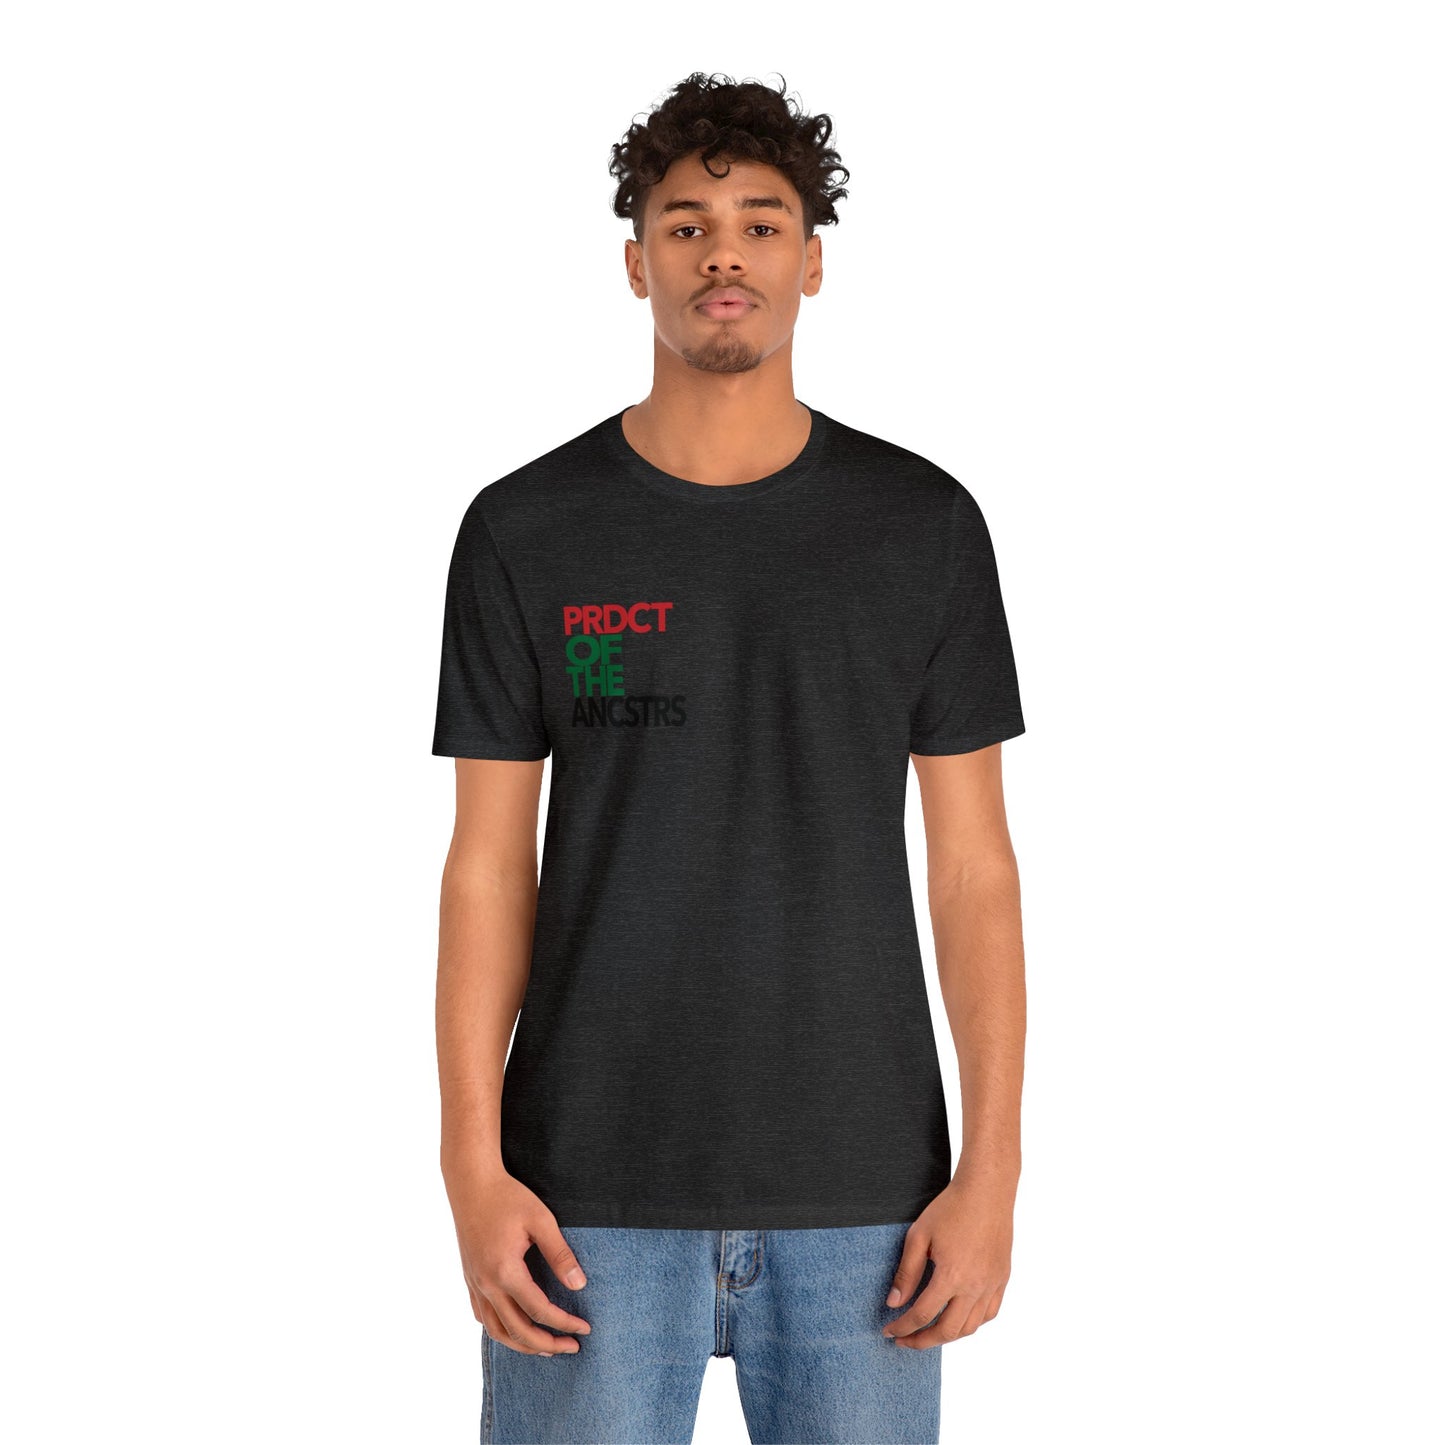 "Product of The Ancestors" Tee